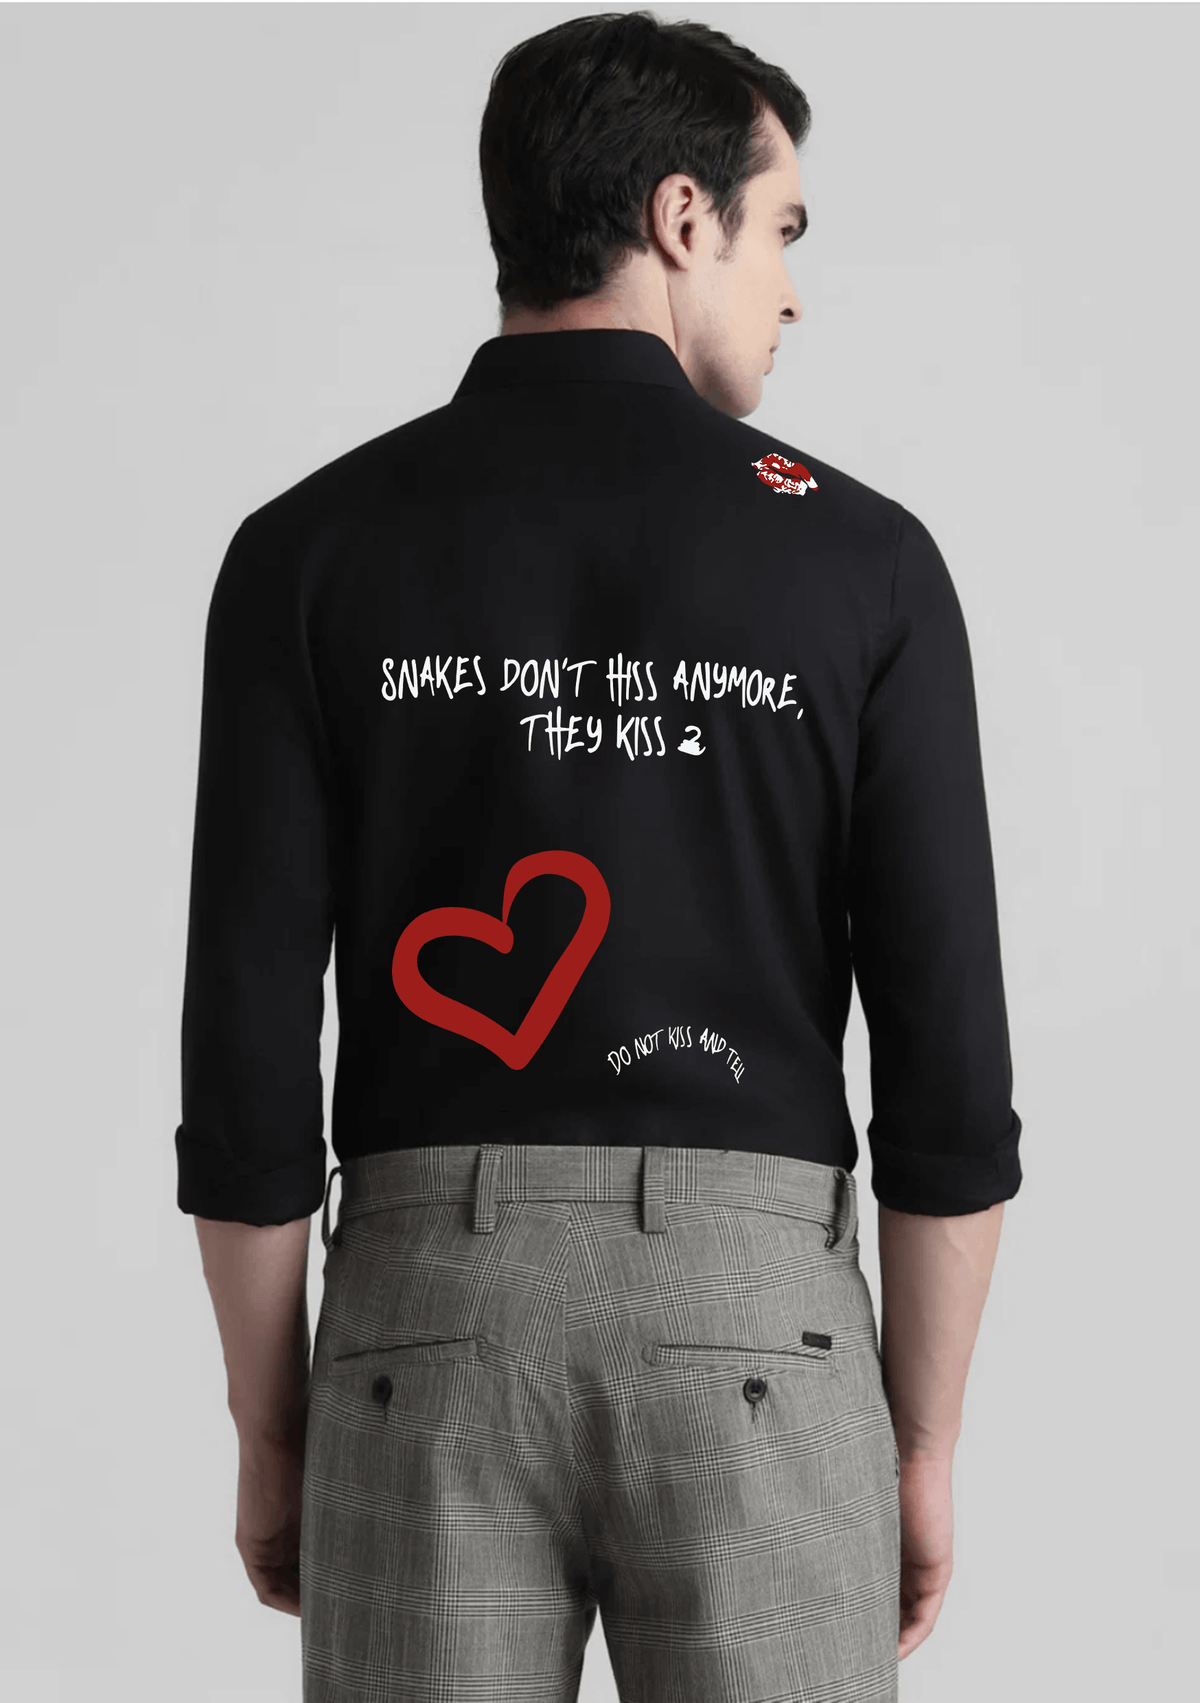 Black heart quote new printed shirt by offmint